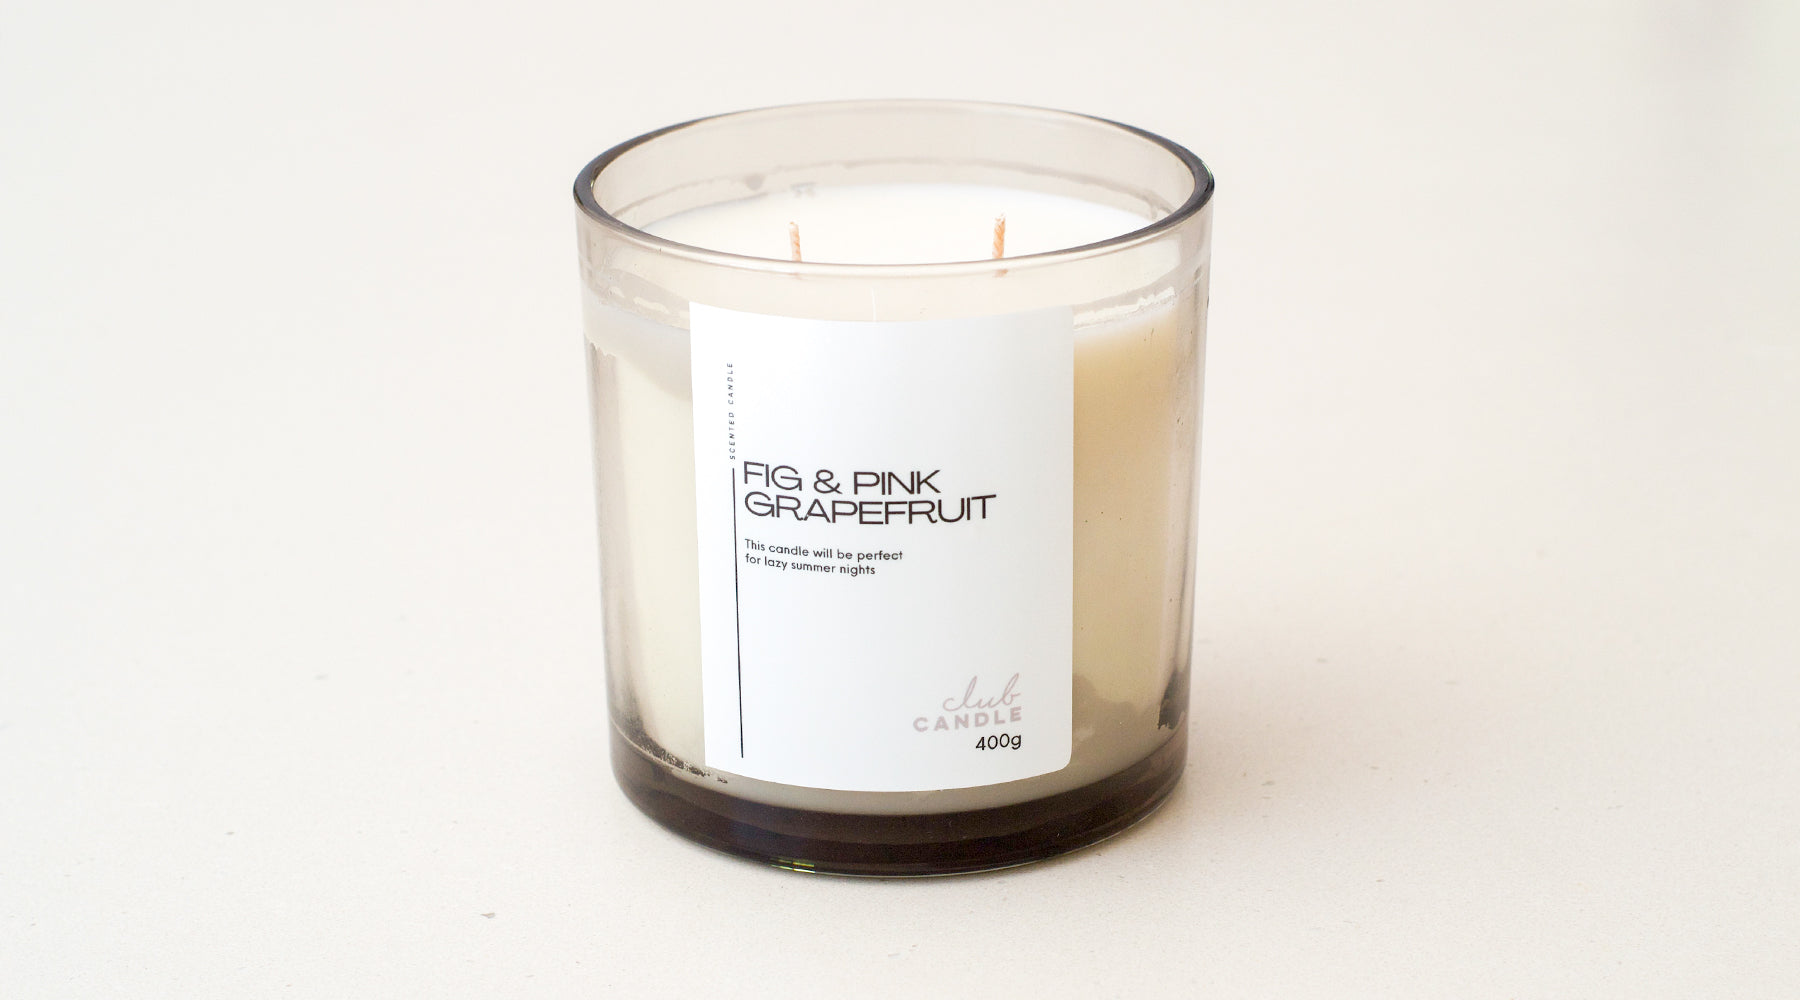 The sweet candle scent of Fig and Pink Grapefruit